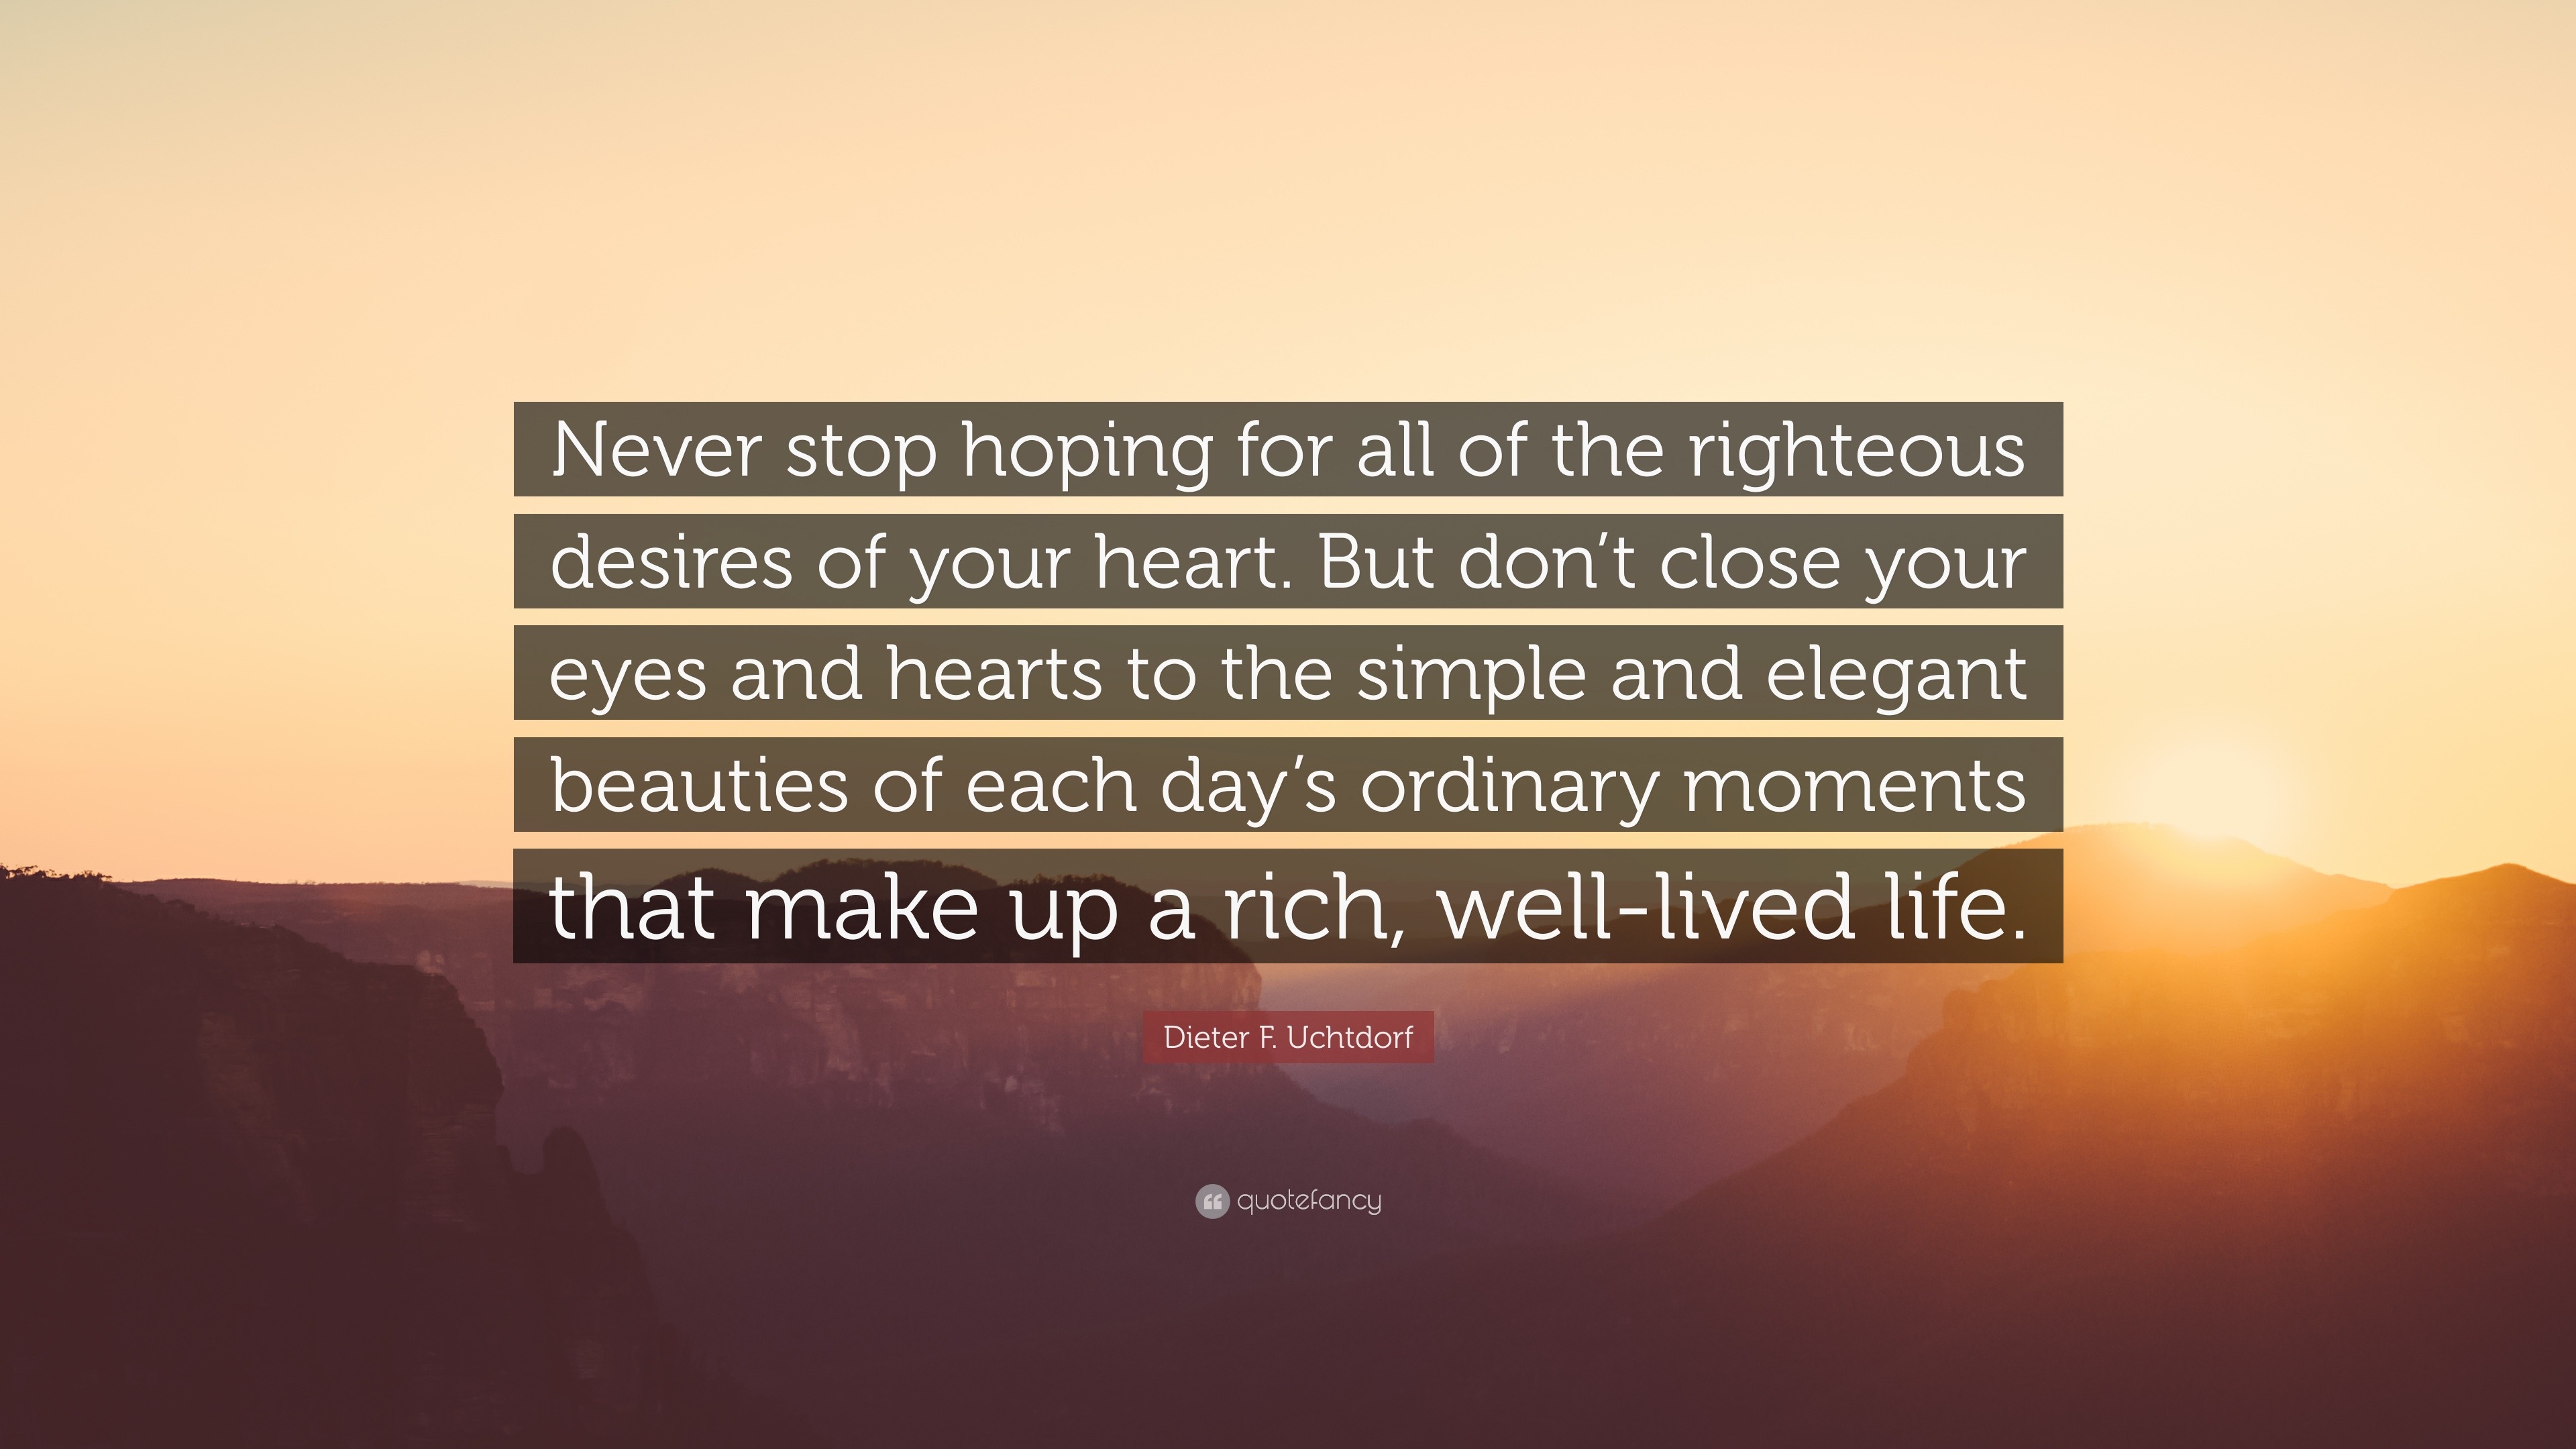 Dieter F. Uchtdorf Quote: “Never stop hoping for all of the righteous  desires of your heart. But don't close your eyes and hearts to the simple  and...”